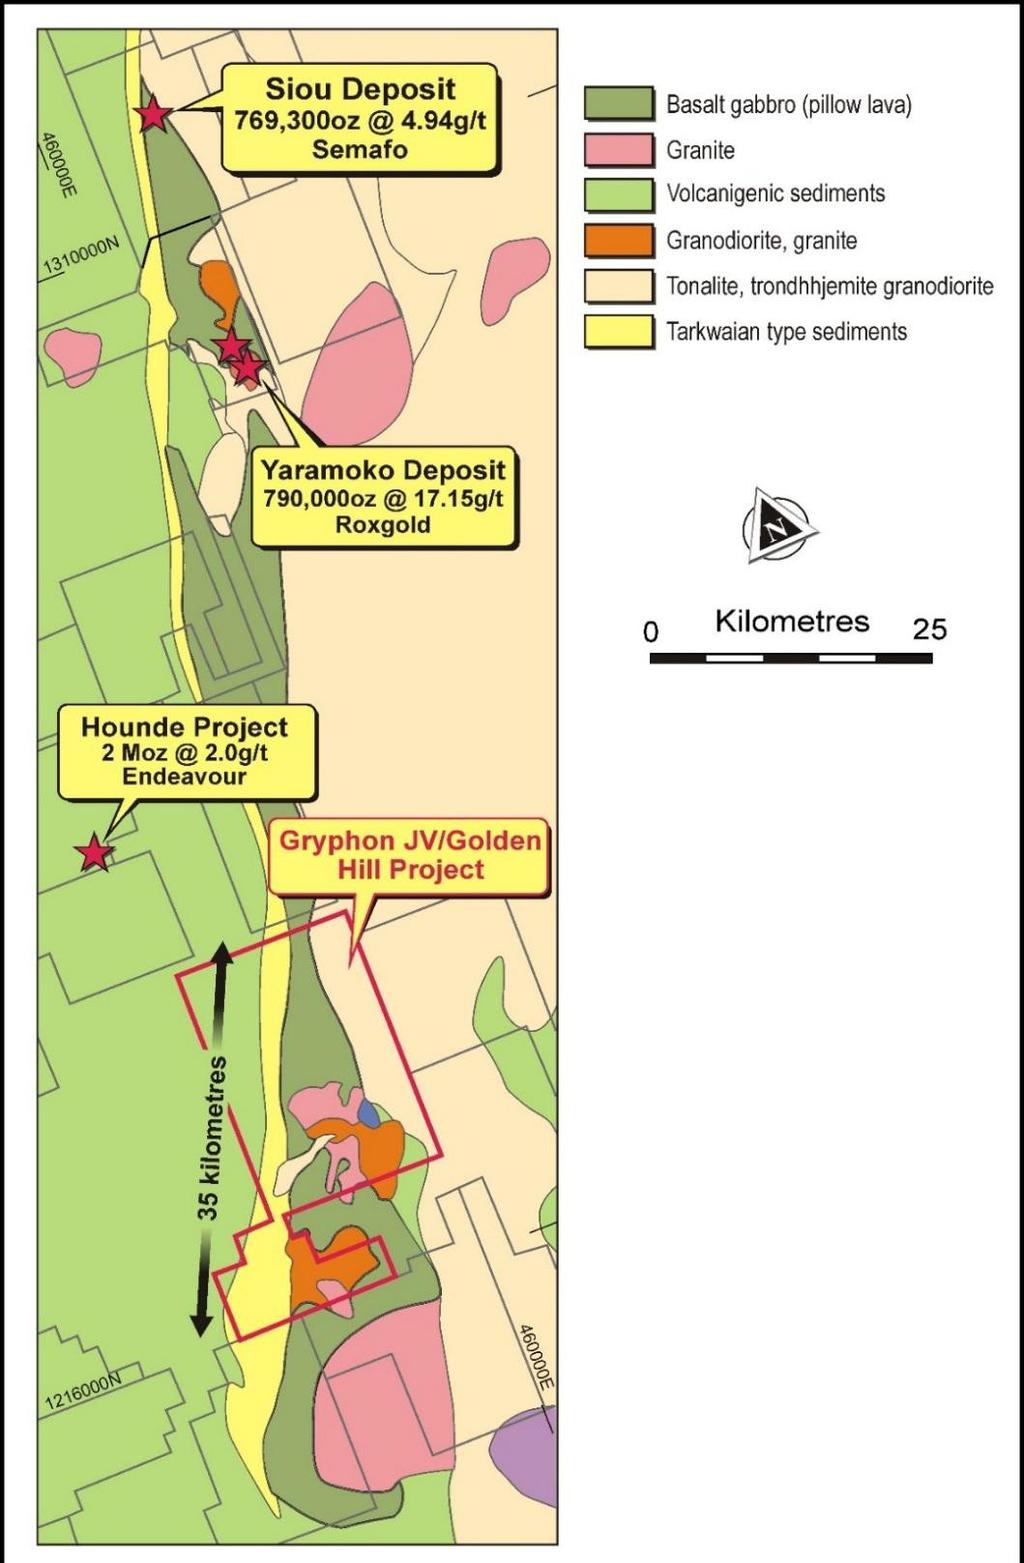 The Golden Hill Project is the most advanced of all the projects in the JV agreement area and is considered particularly prospective as it is located within the highly mineralised Houndé Greenstone